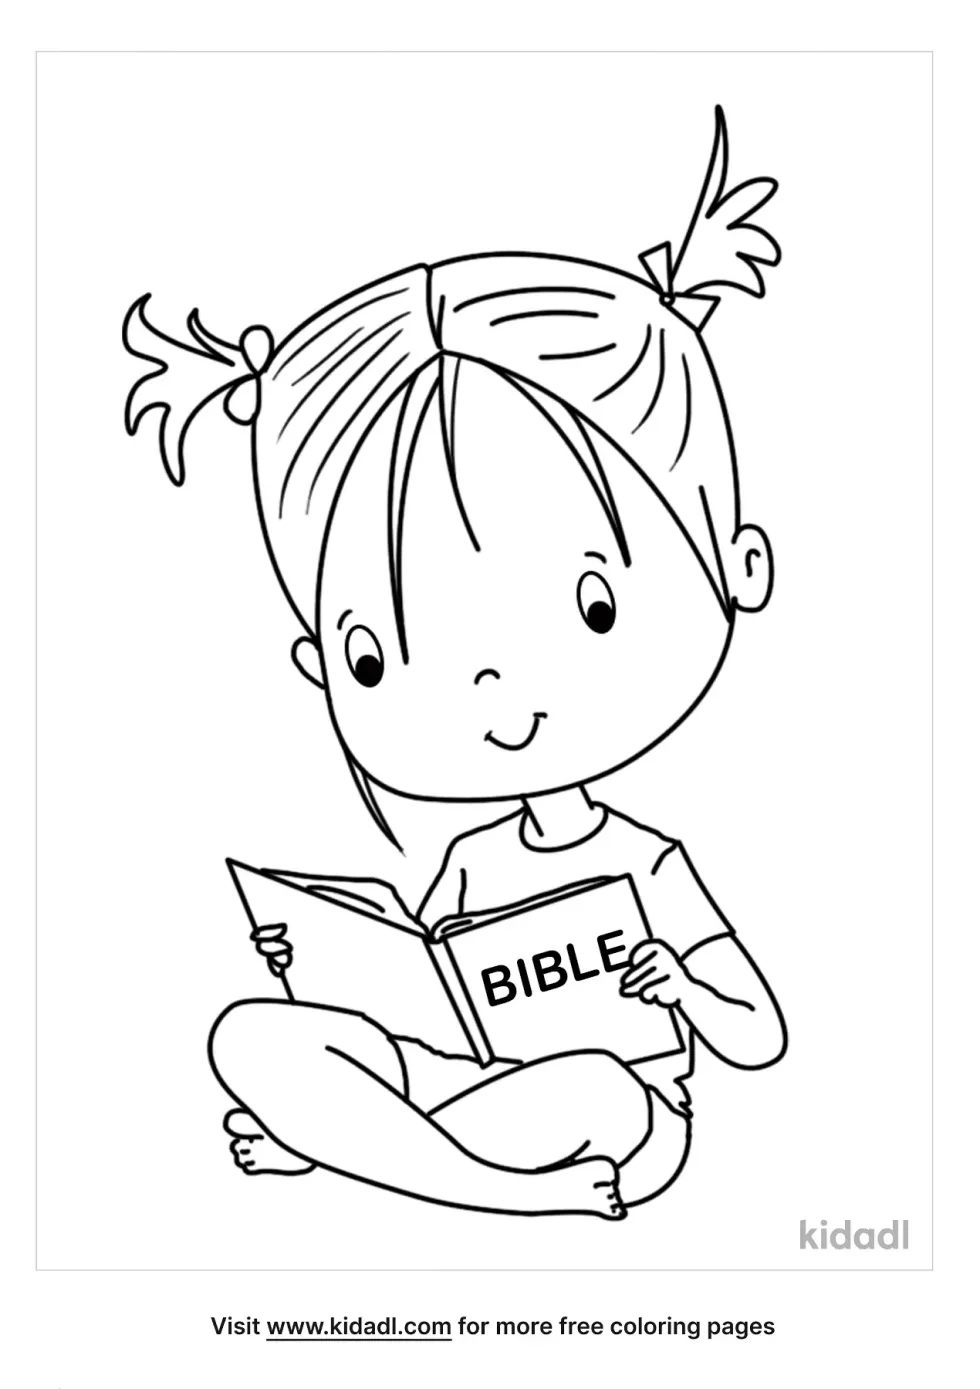 Read Your Bible Coloring Page